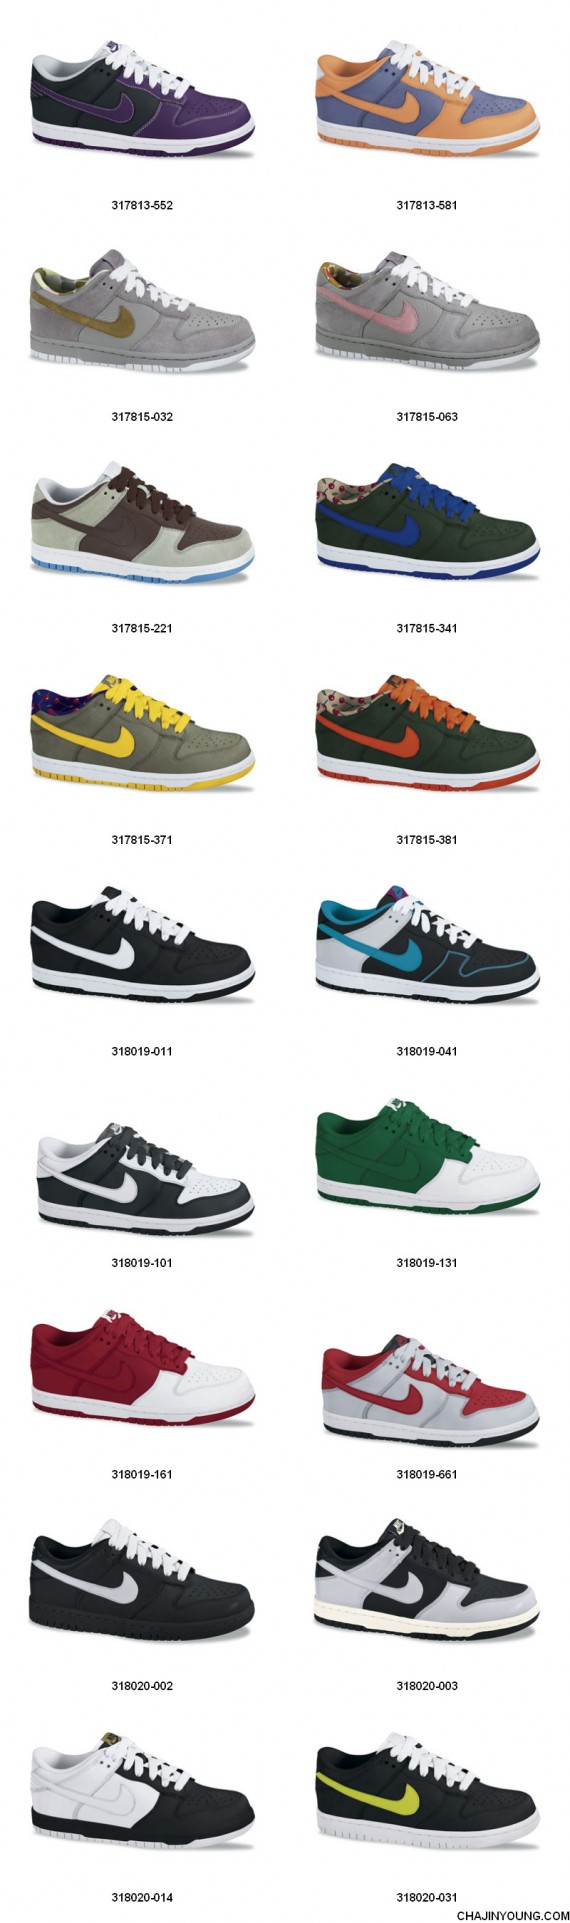 Nike Dunk Low - 2009 Preview - SneakerNews.com